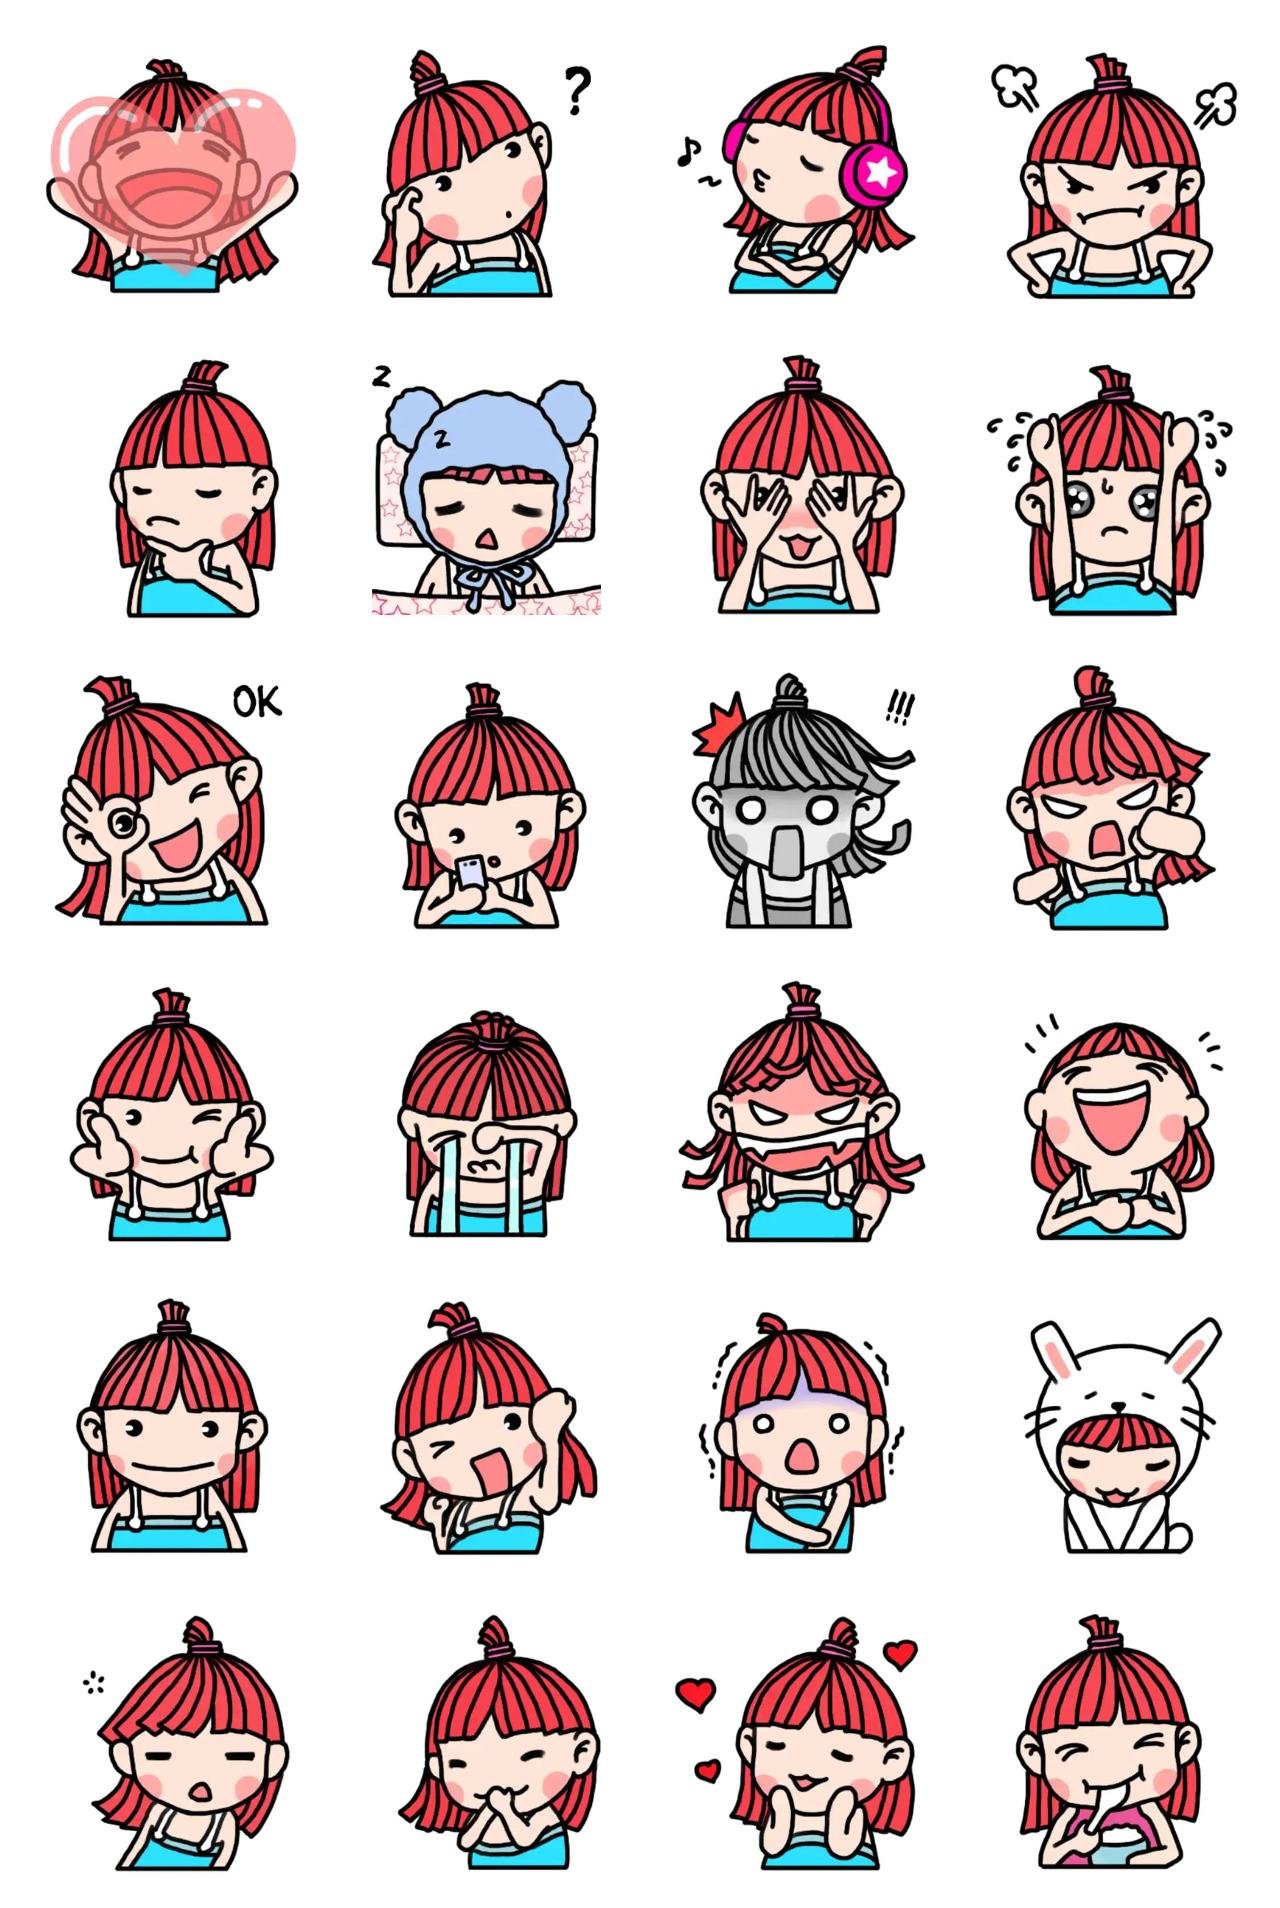 L People sticker pack for Whatsapp, Telegram, Signal, and others chatting and message apps